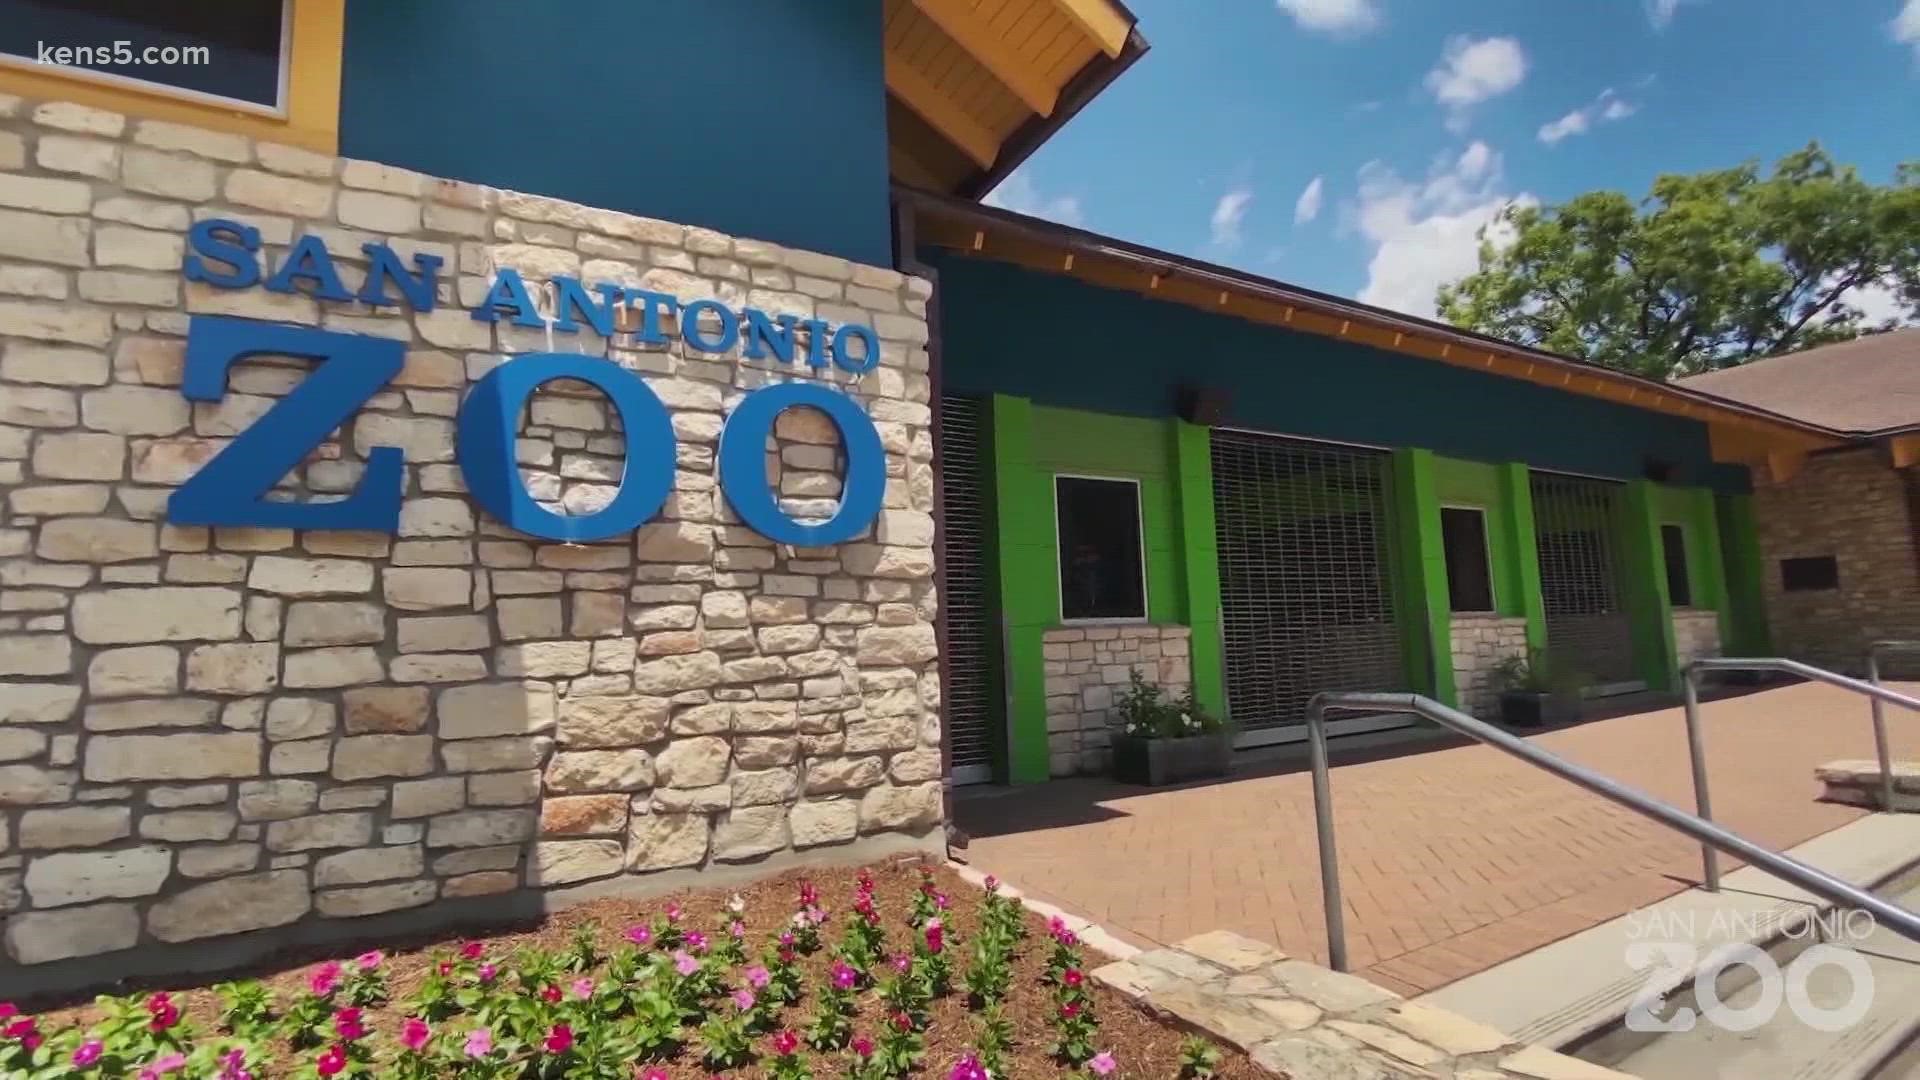 The San Antonio Zoo gathered its employees together to announce they will receive payment to make up for their hours, pay reduction caused by the pandemic.